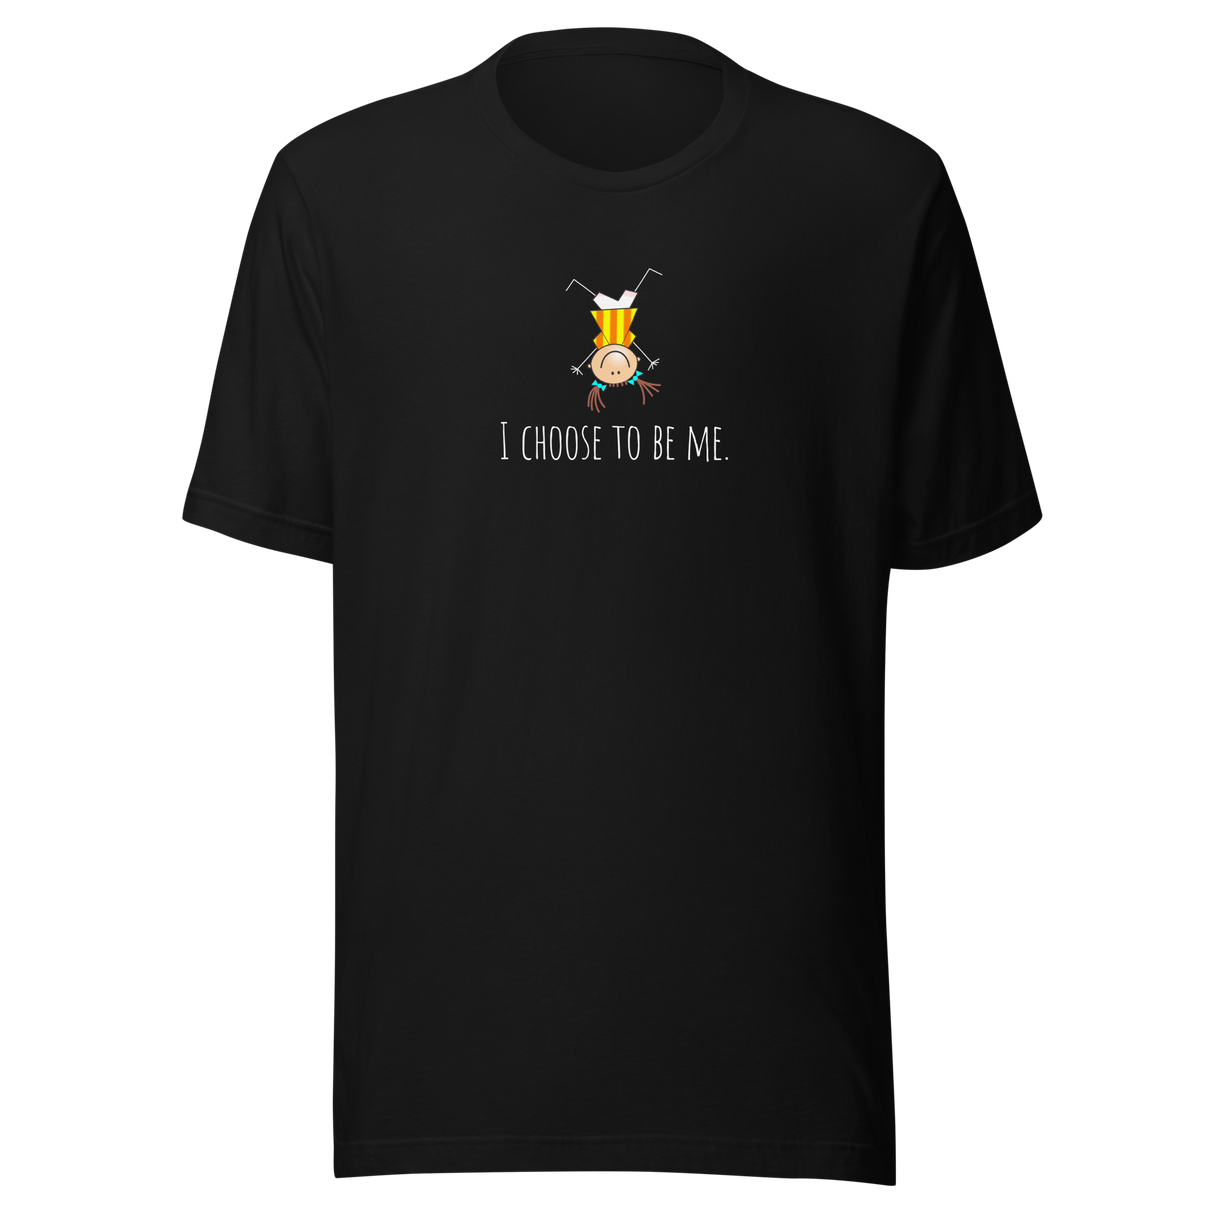 i-choose-to-be-me-happy-tee-choose-t-shirt-cool-tee-inspirational-t-shirt-lgbt-tee#color_black